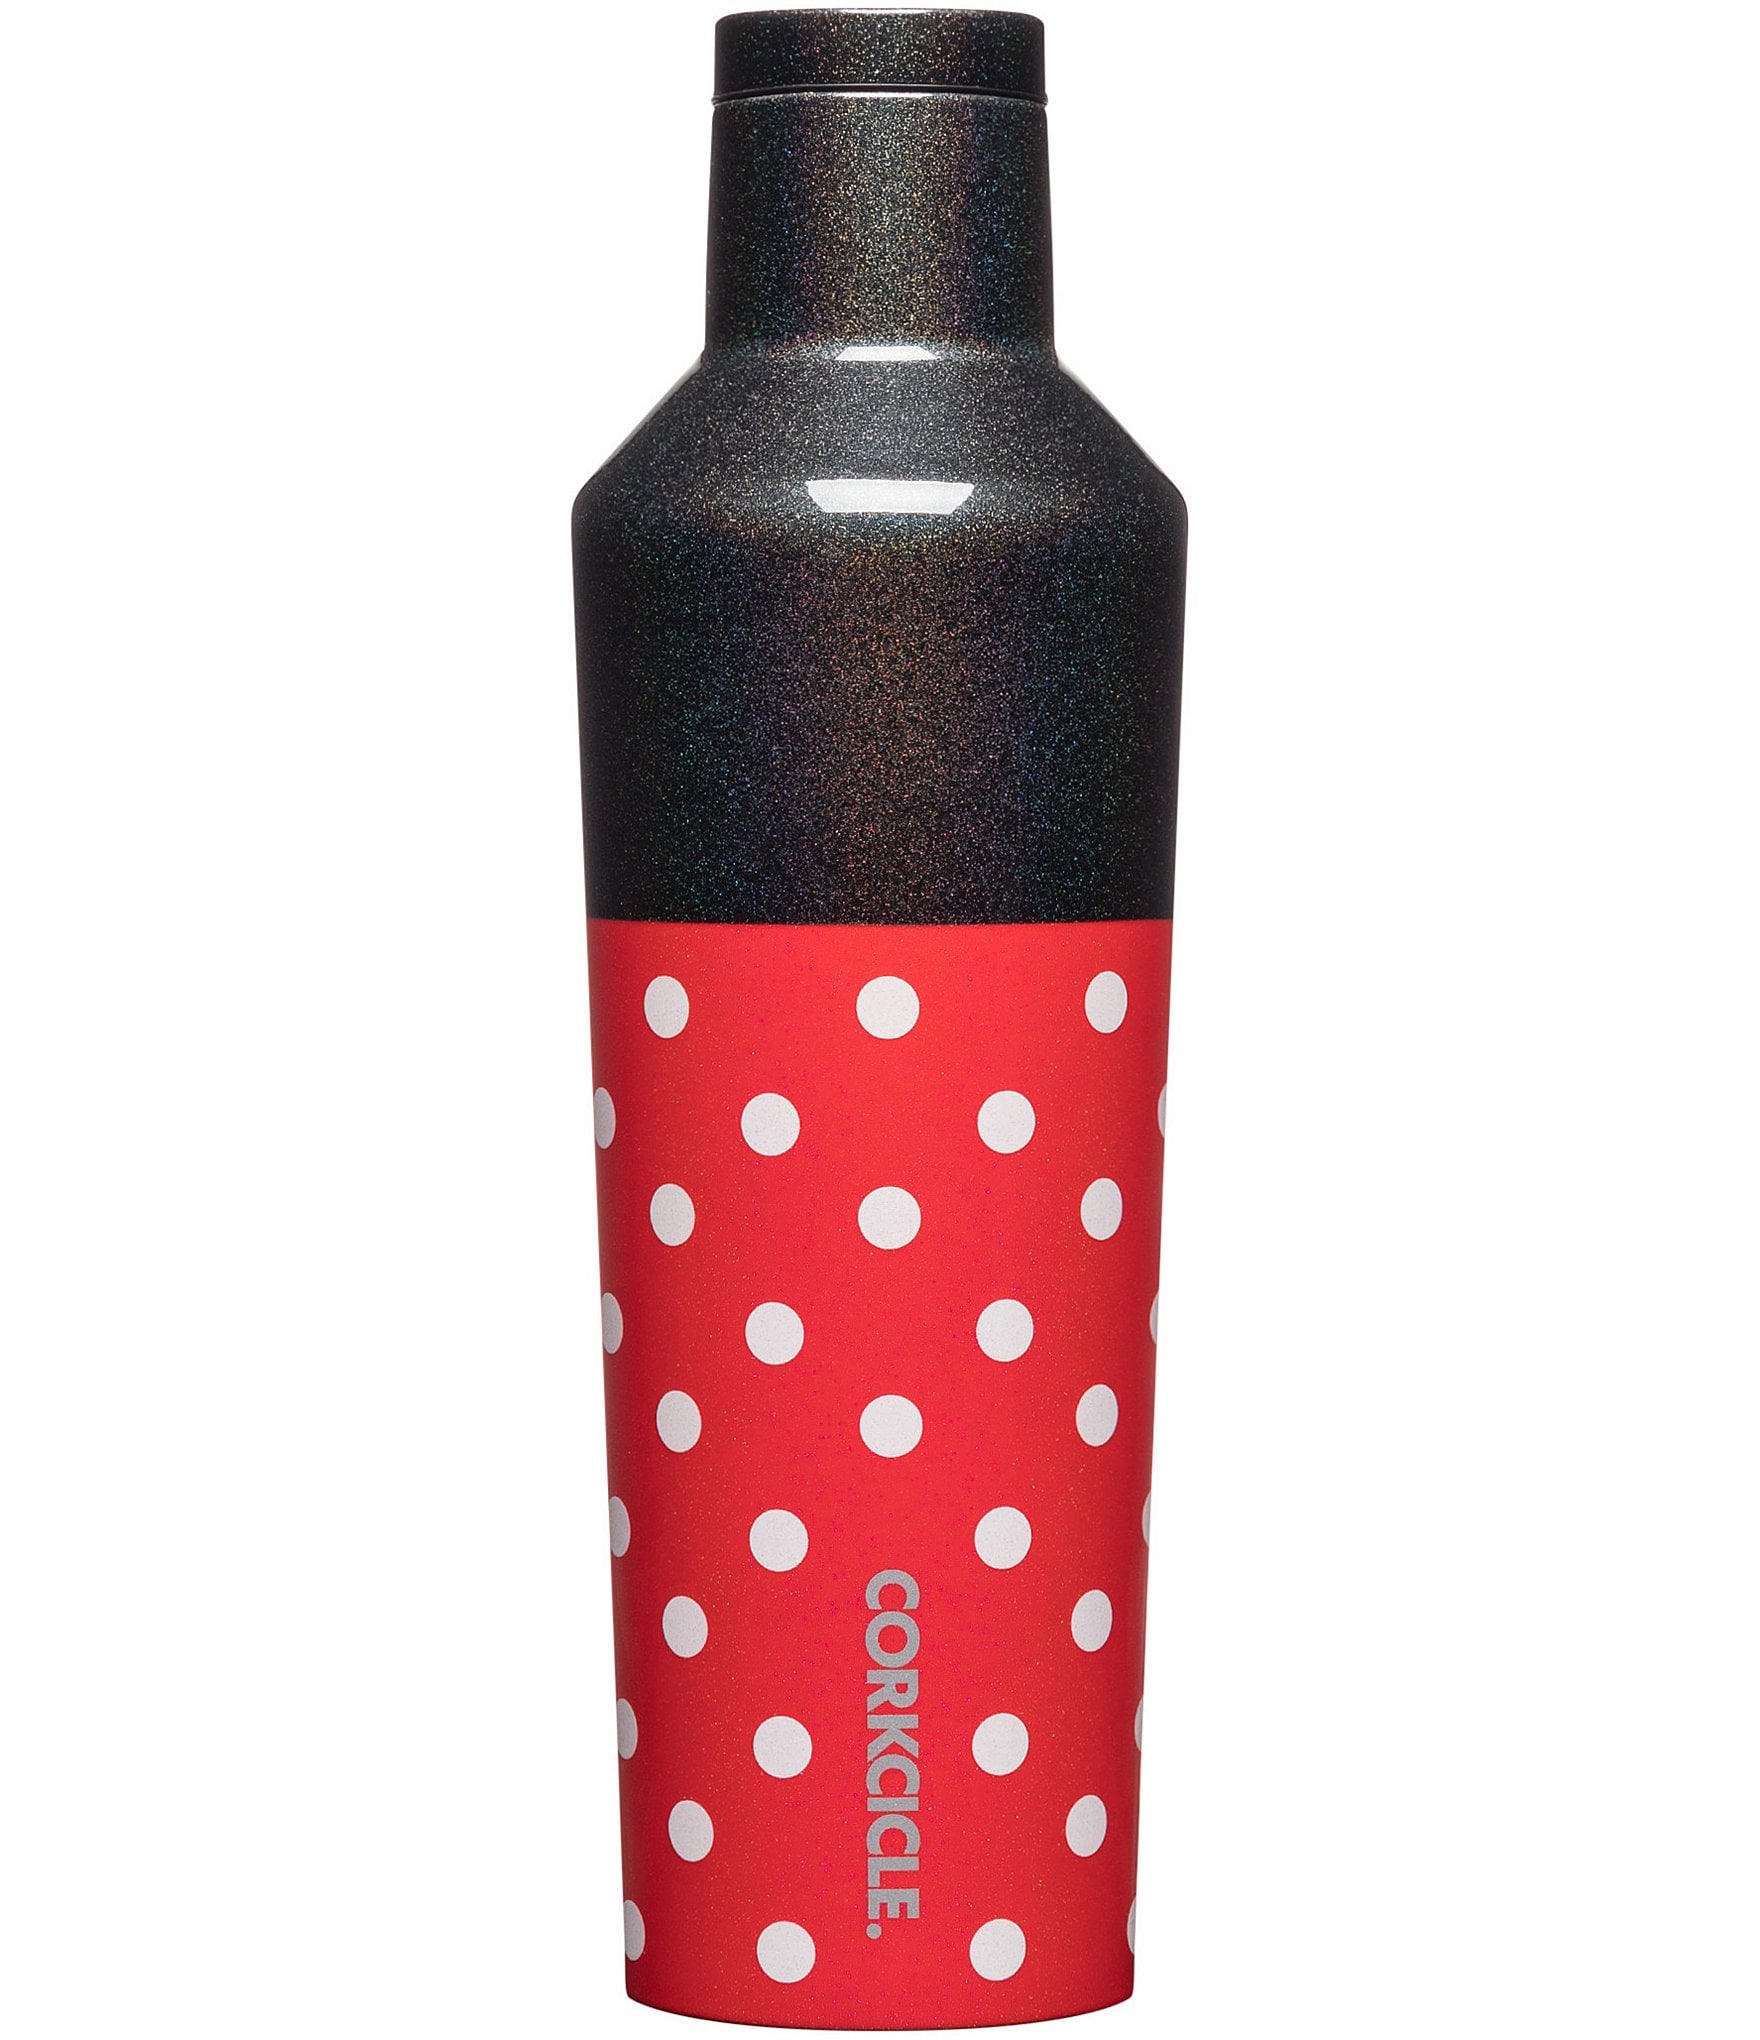 https://dimg.dillards.com/is/image/DillardsZoom/zoom/corkcicle-stainles-steel-triple-insulated-disney-16-oz-canteen/00000000_zi_21c81c97-21db-4610-a5af-dfff5cf3055b.jpg